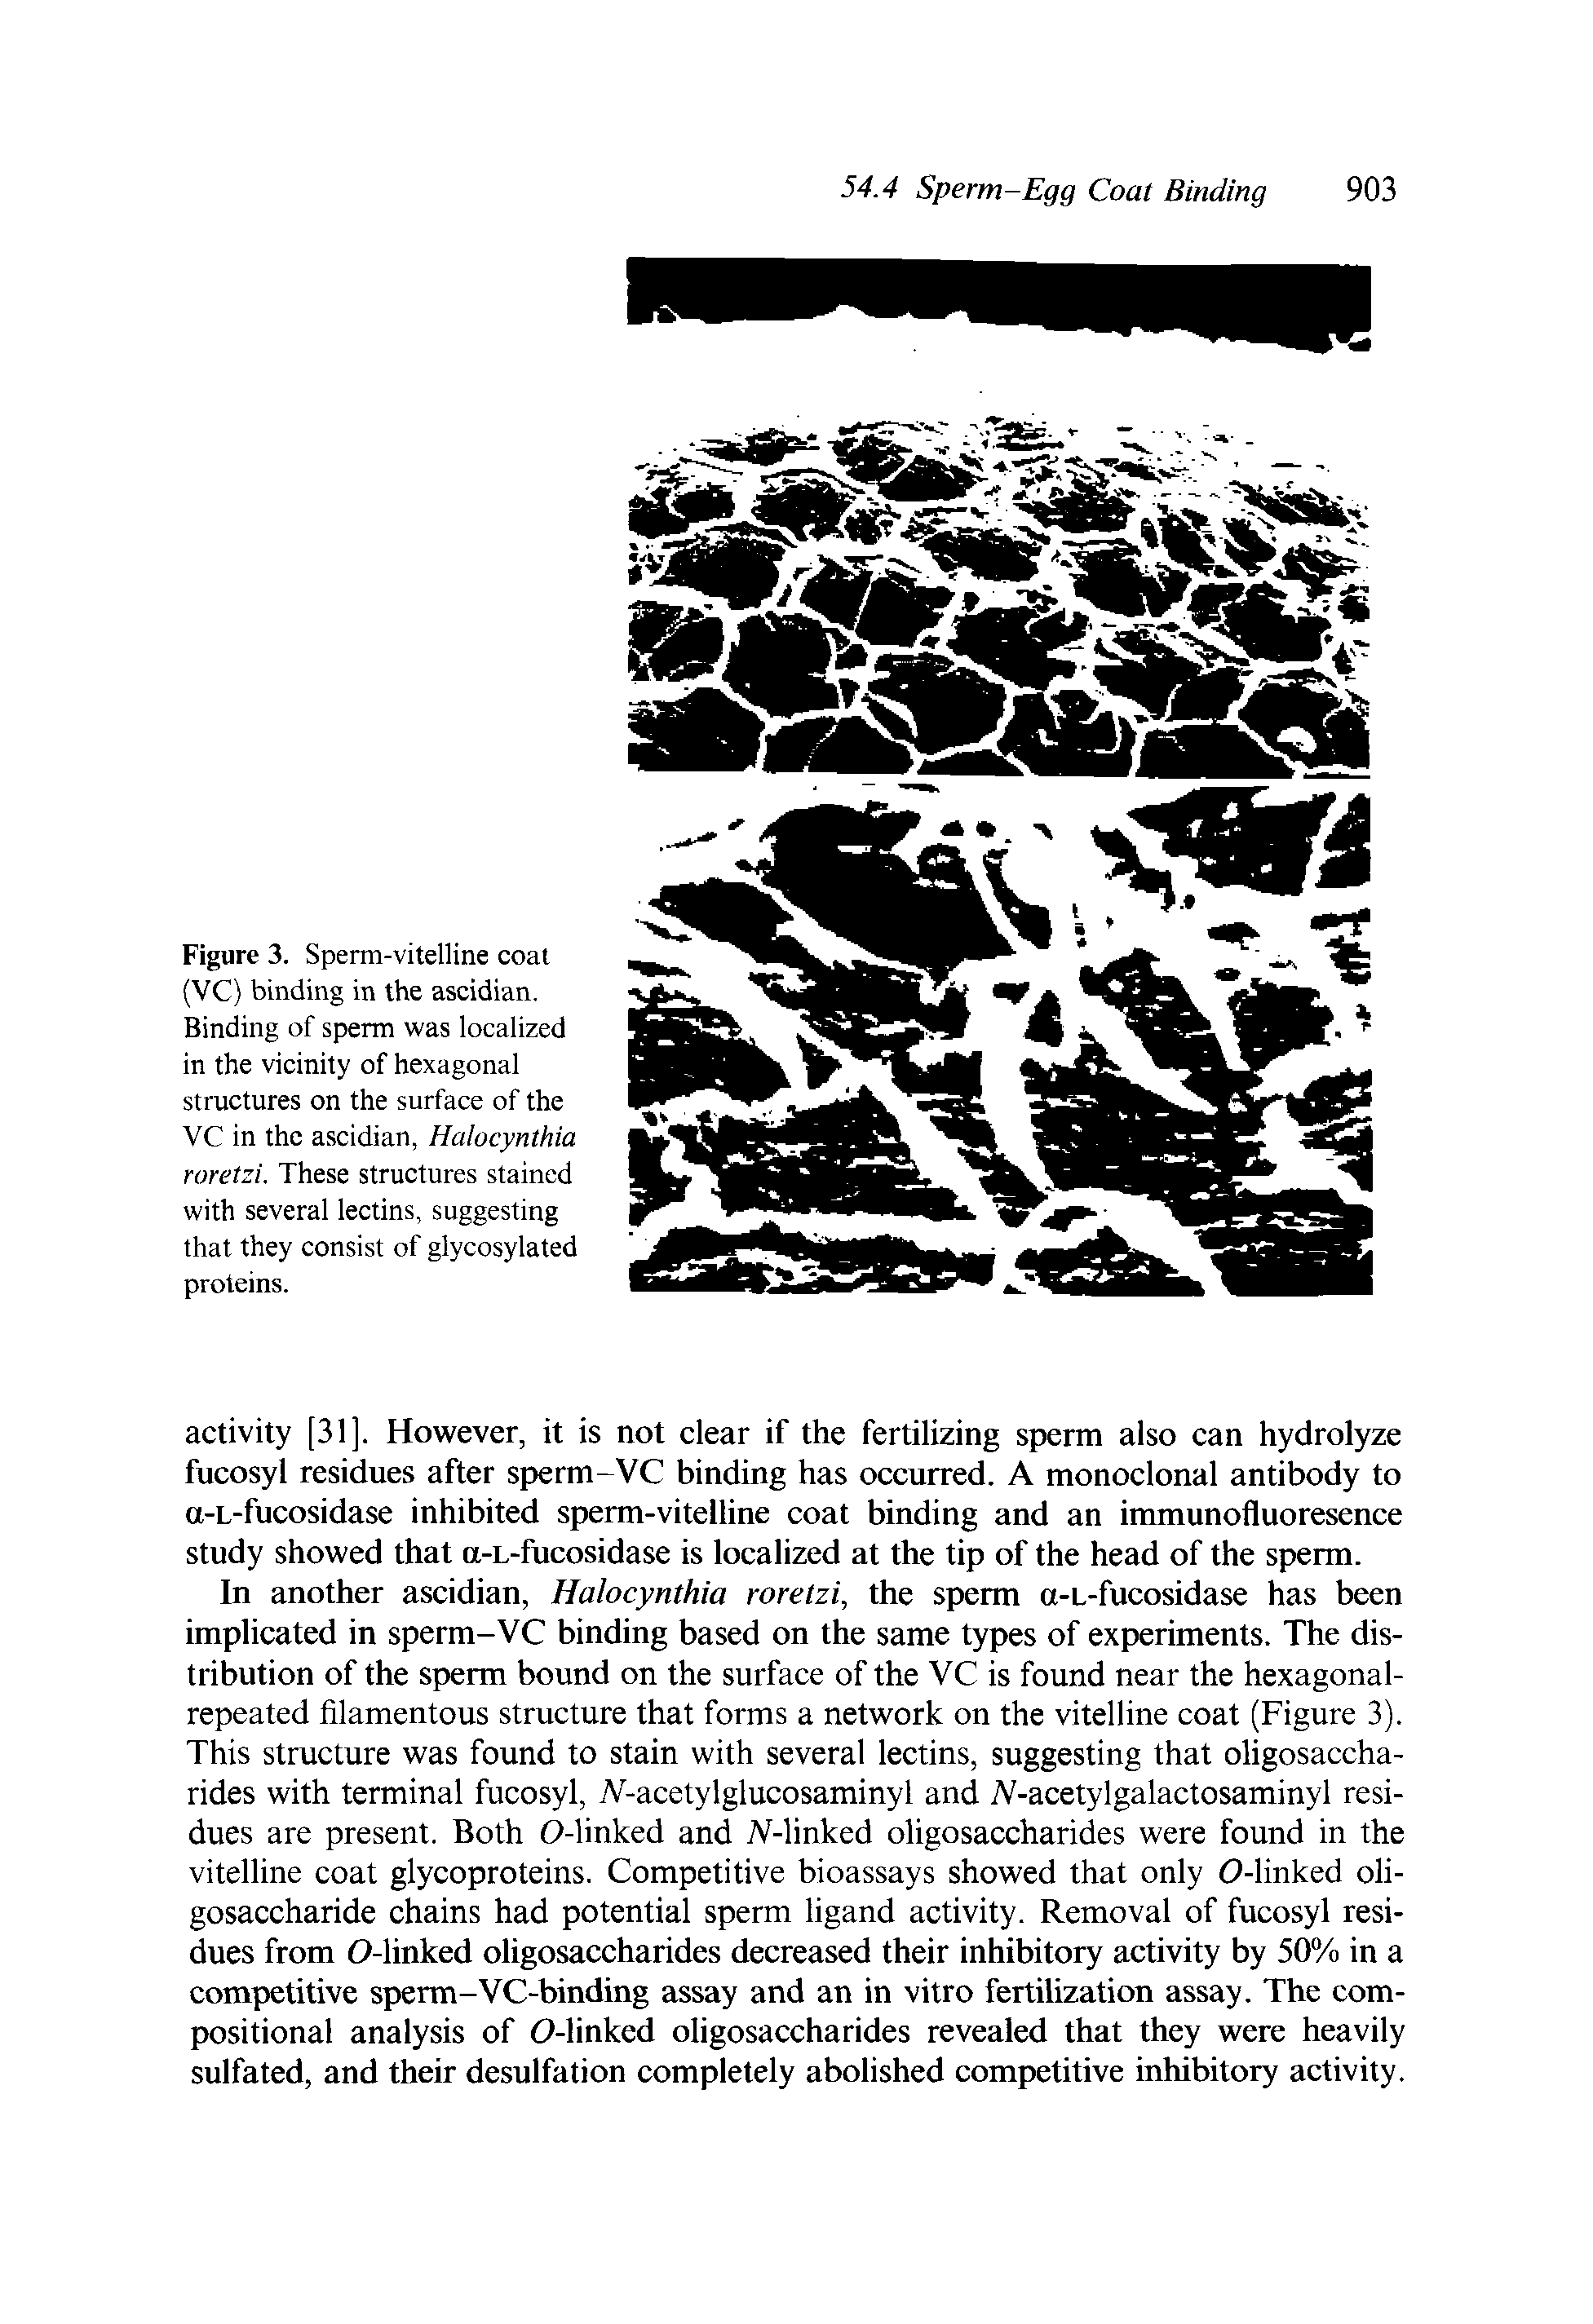 Figure 3. Sperm-vitelline coat (VC) binding in the ascidian. Binding of sperm was localized in the vicinity of hexagonal structures on the surface of the VC in the ascidian, Halocynthia roretzi. These structures stained with several lectins, suggesting that they consist of glycosylated proteins.